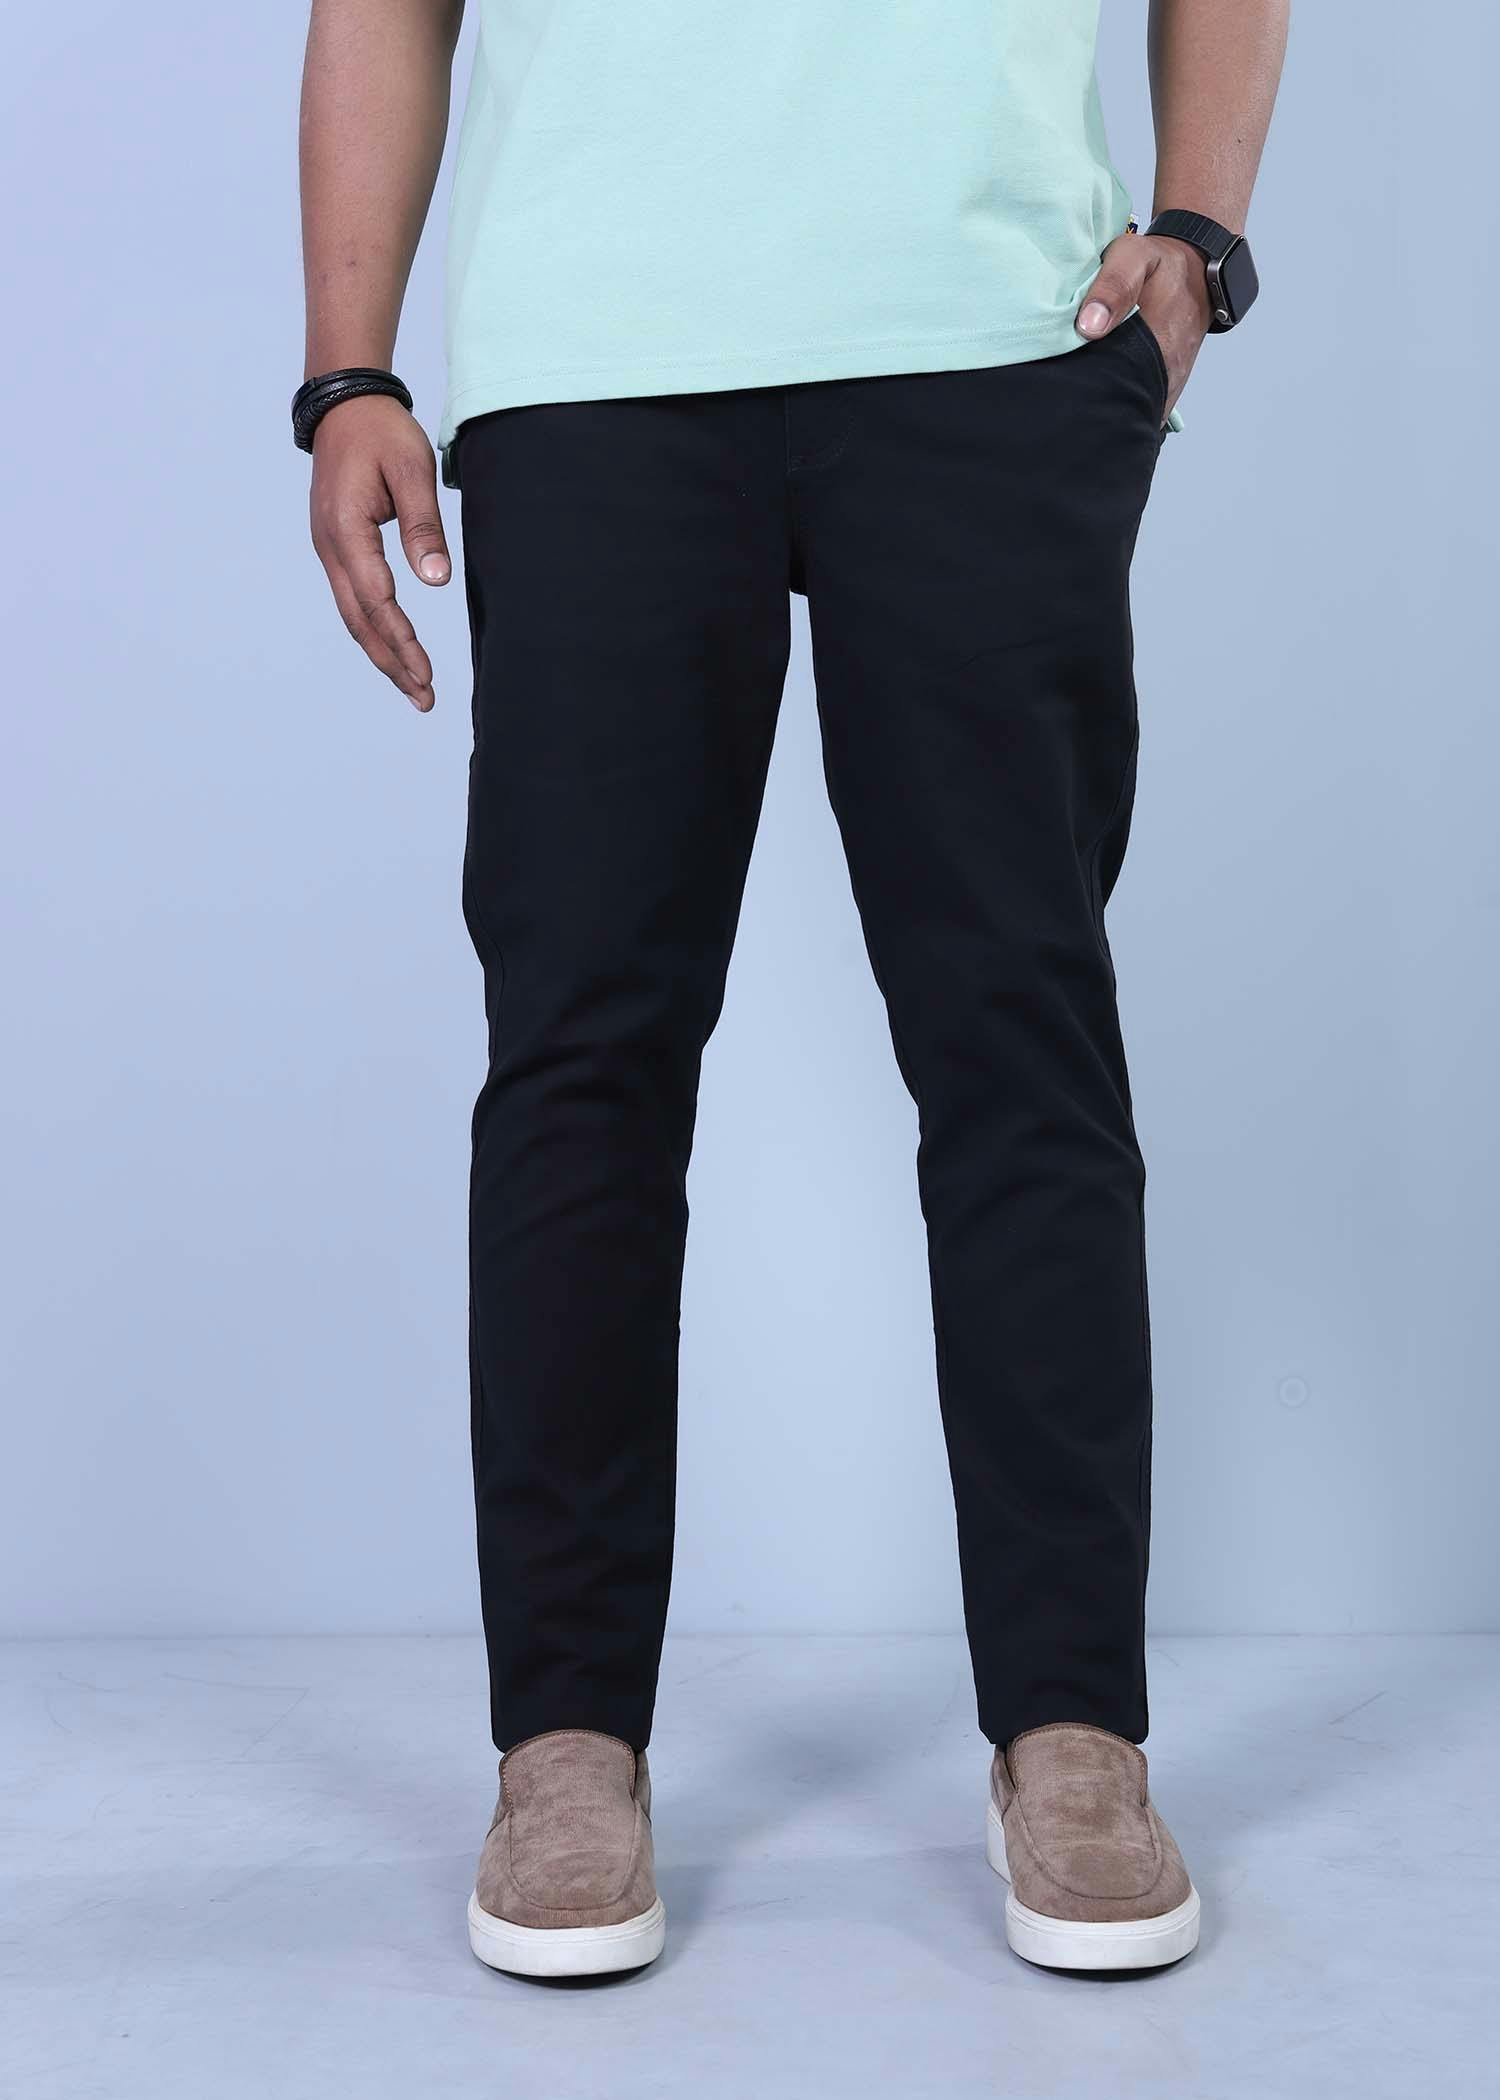 parla i chino pant black color half front view